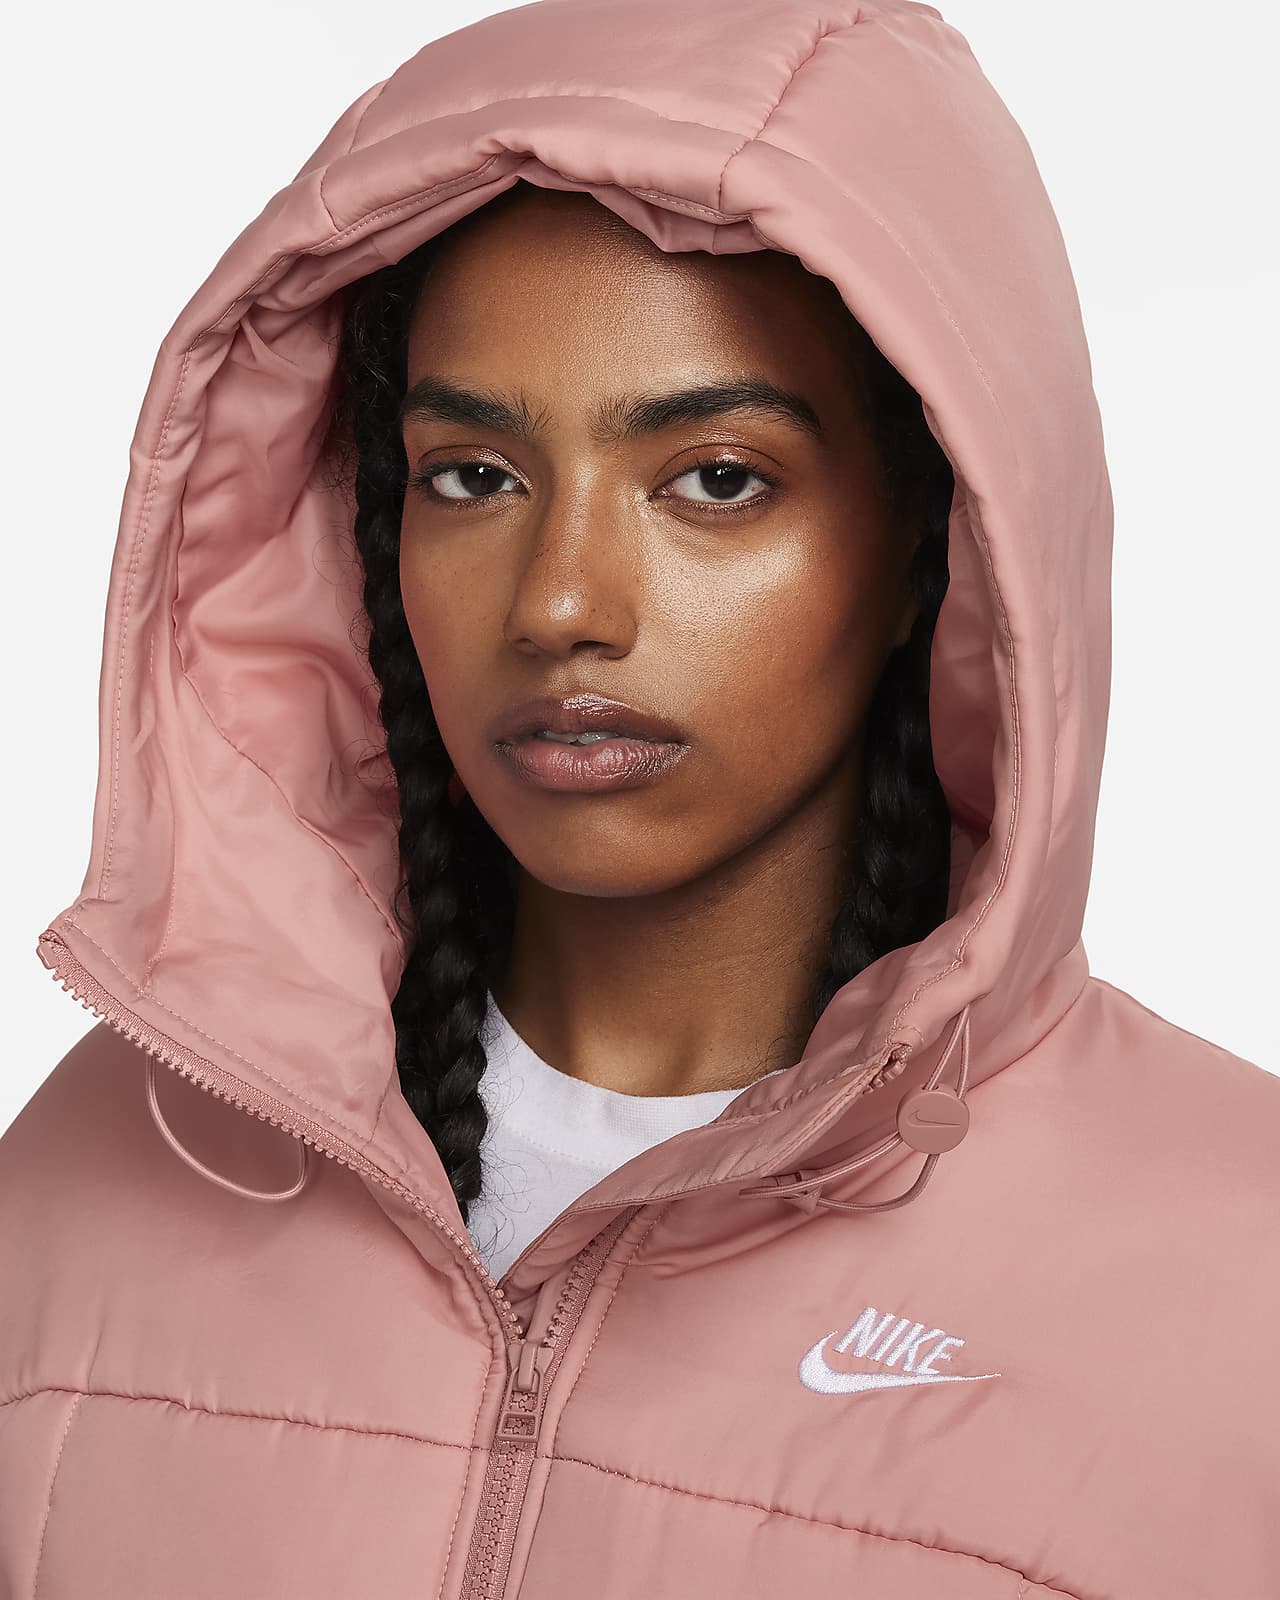 Nike Sportswear Windrunner Therma-FIT Water-Resistant Puffer